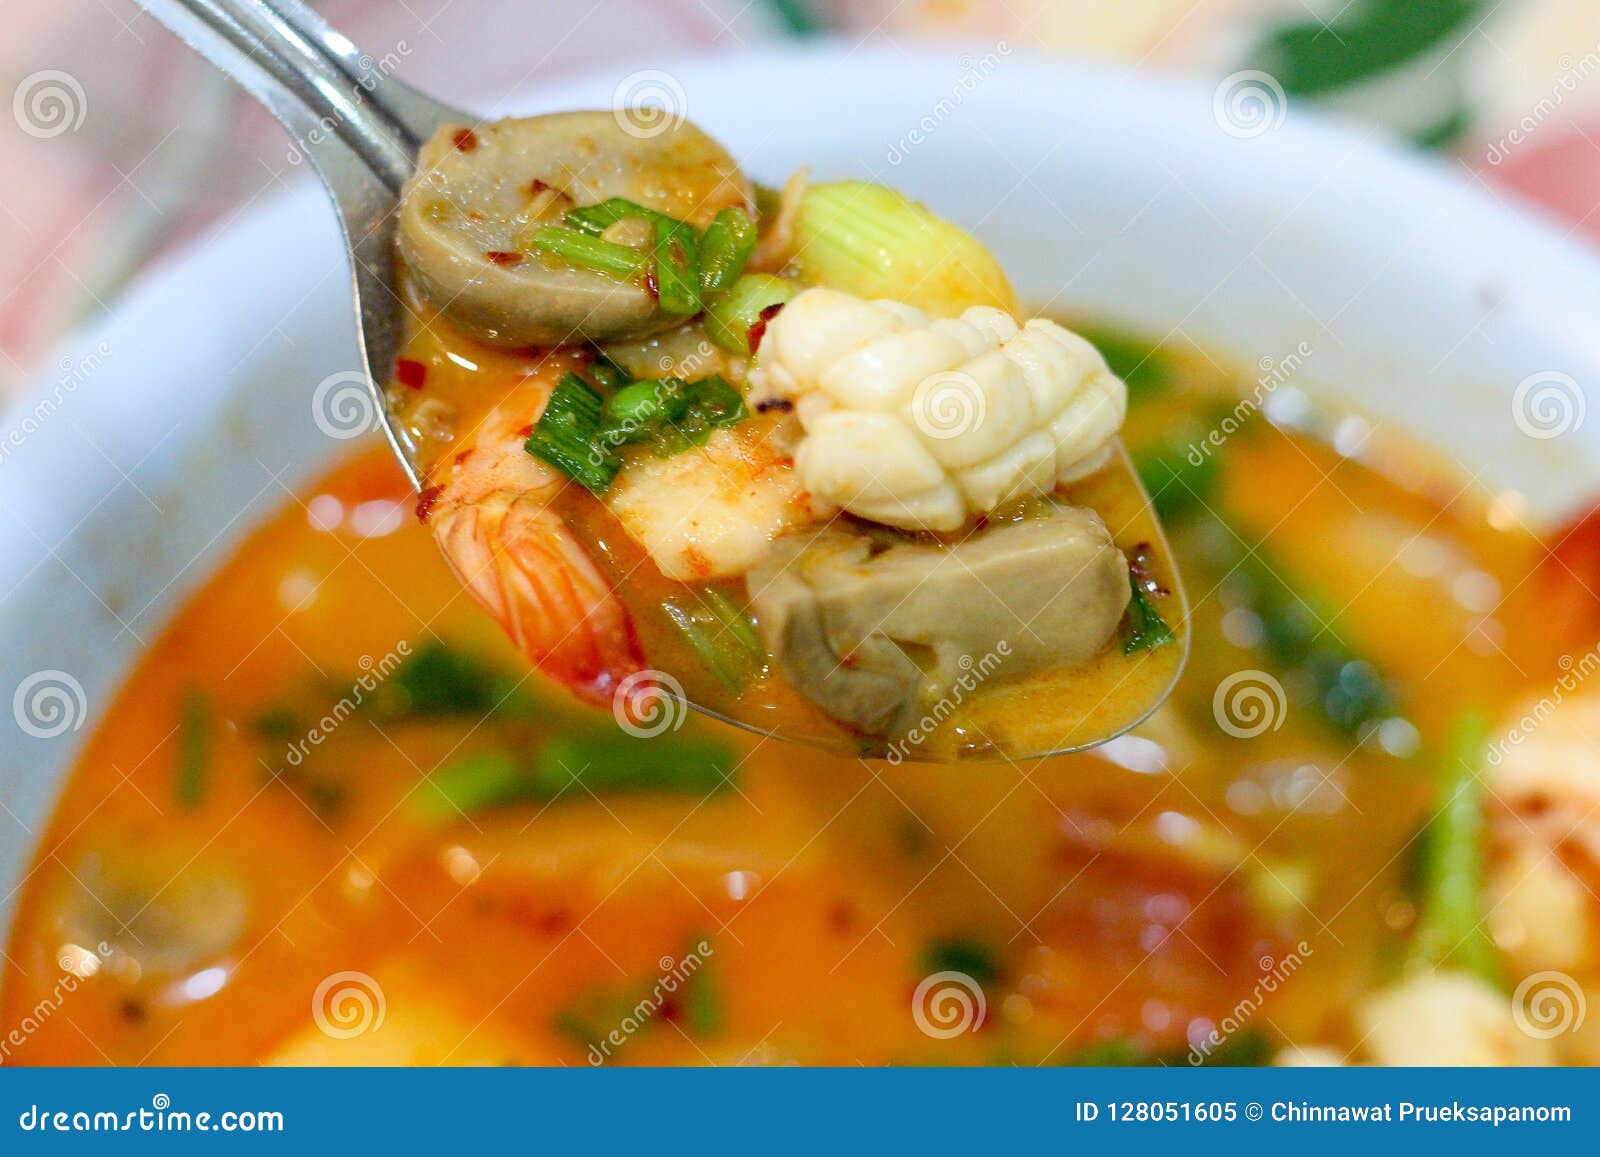 Hot and Sour Soup with Shrimp and Vegetable. Stock Image - Image of ...